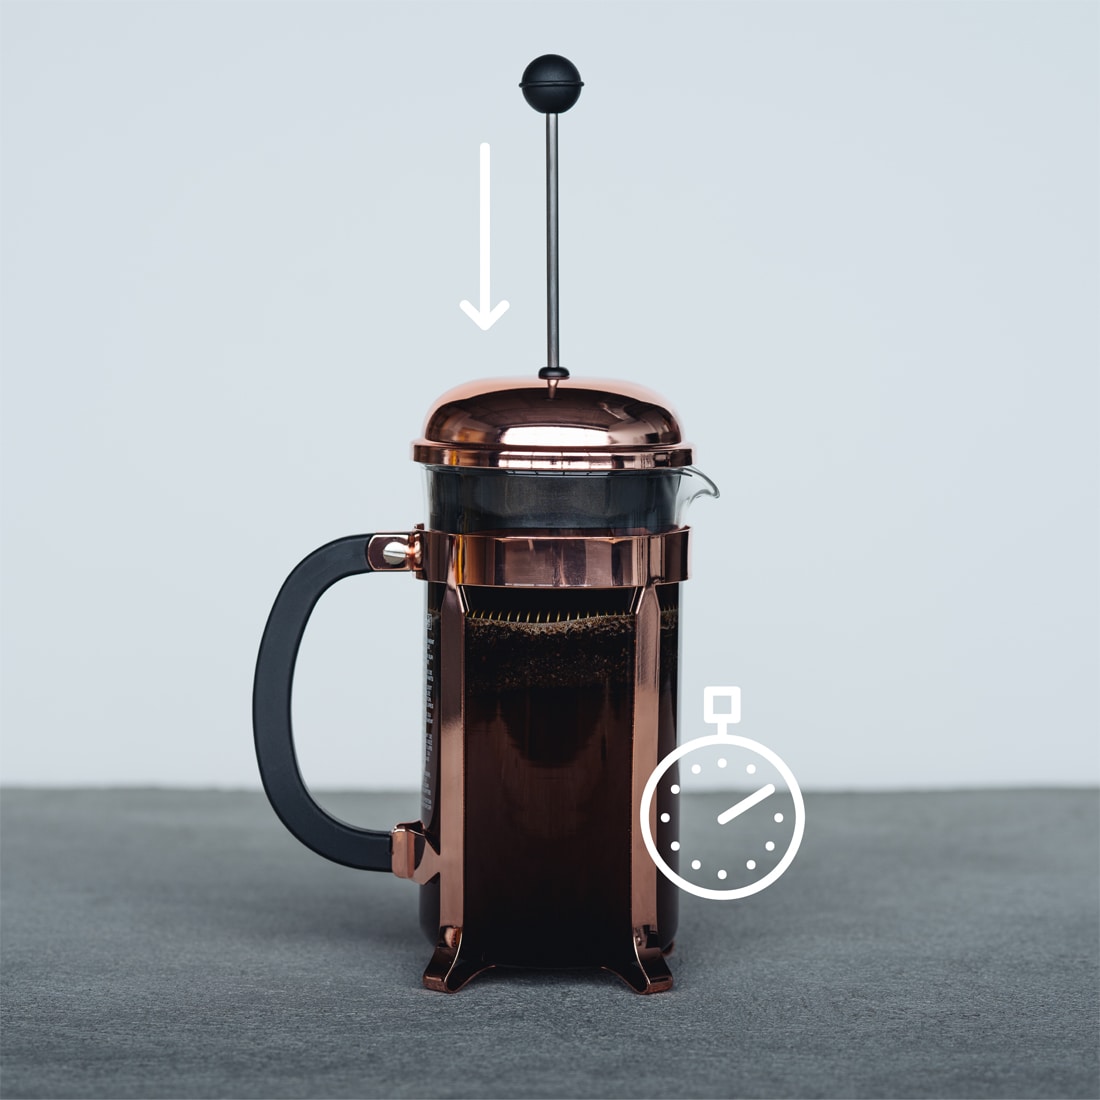 French press with overlaid line illustrations of stopwatch and and a downward arrow near the top of the french press